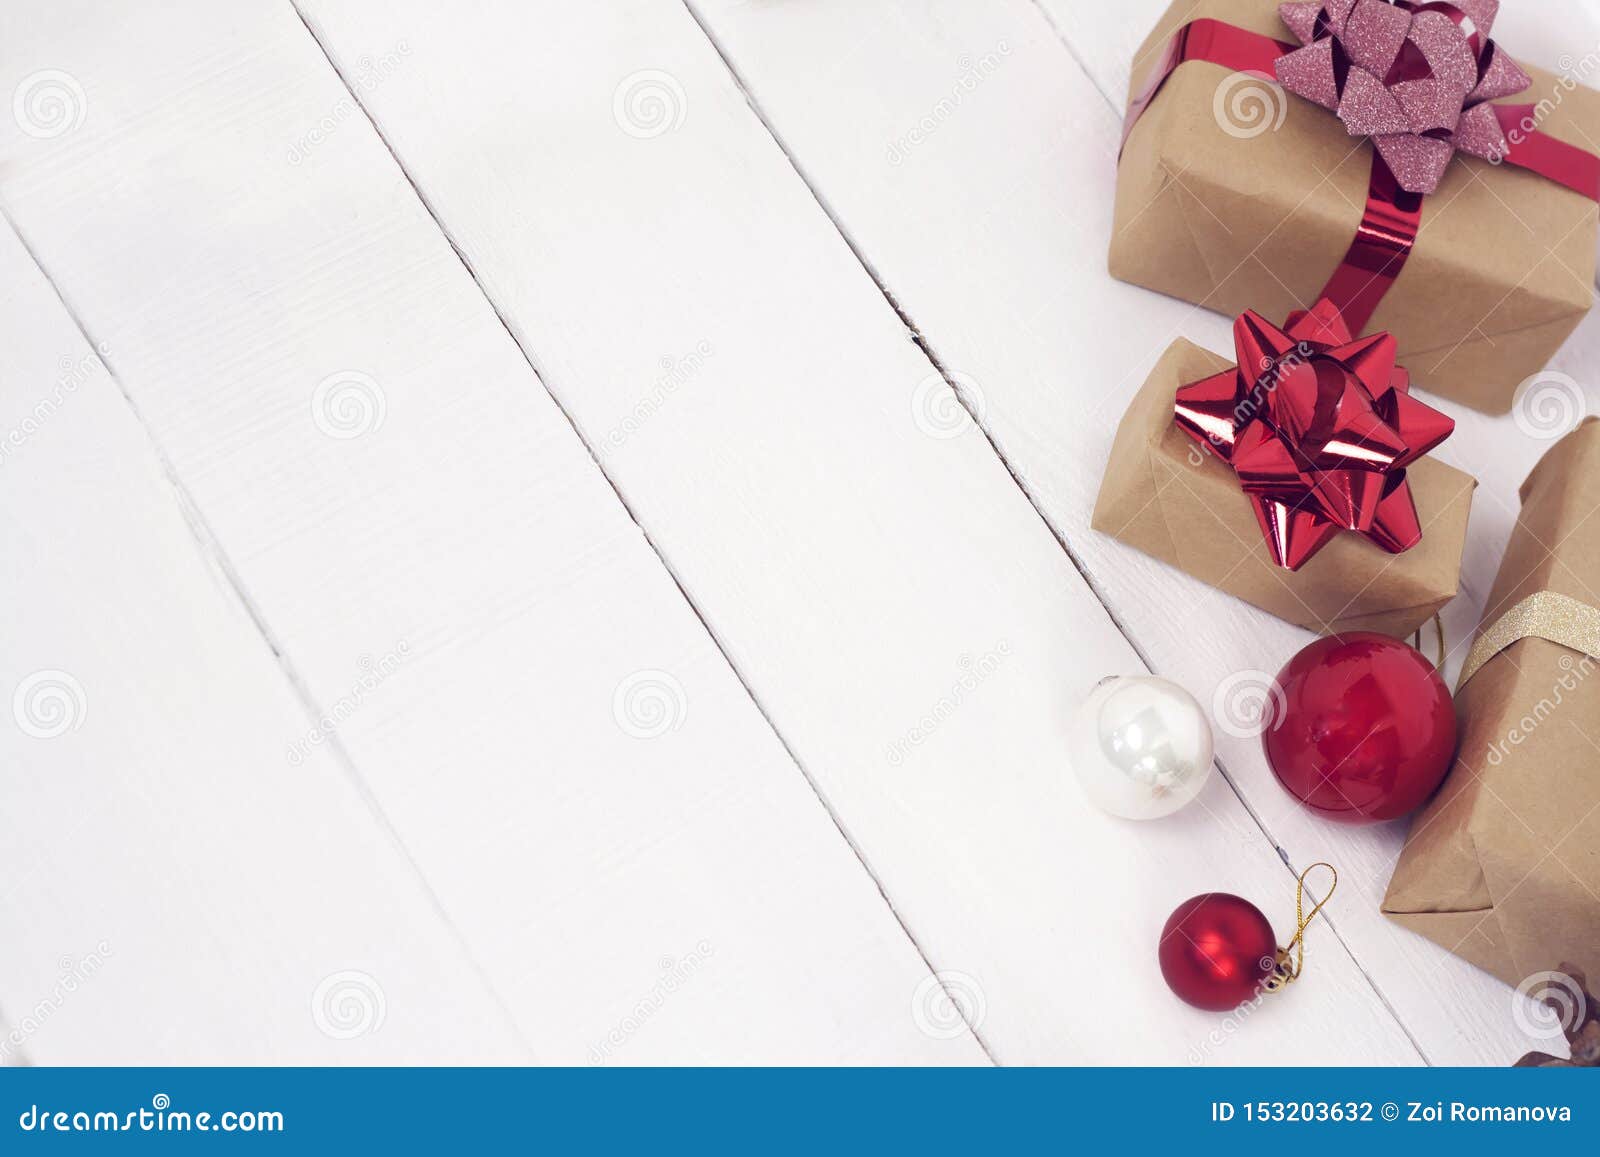 happy new year 2020 christmastime. gift boxes and christmas tree toys on background. winter light rustic photo